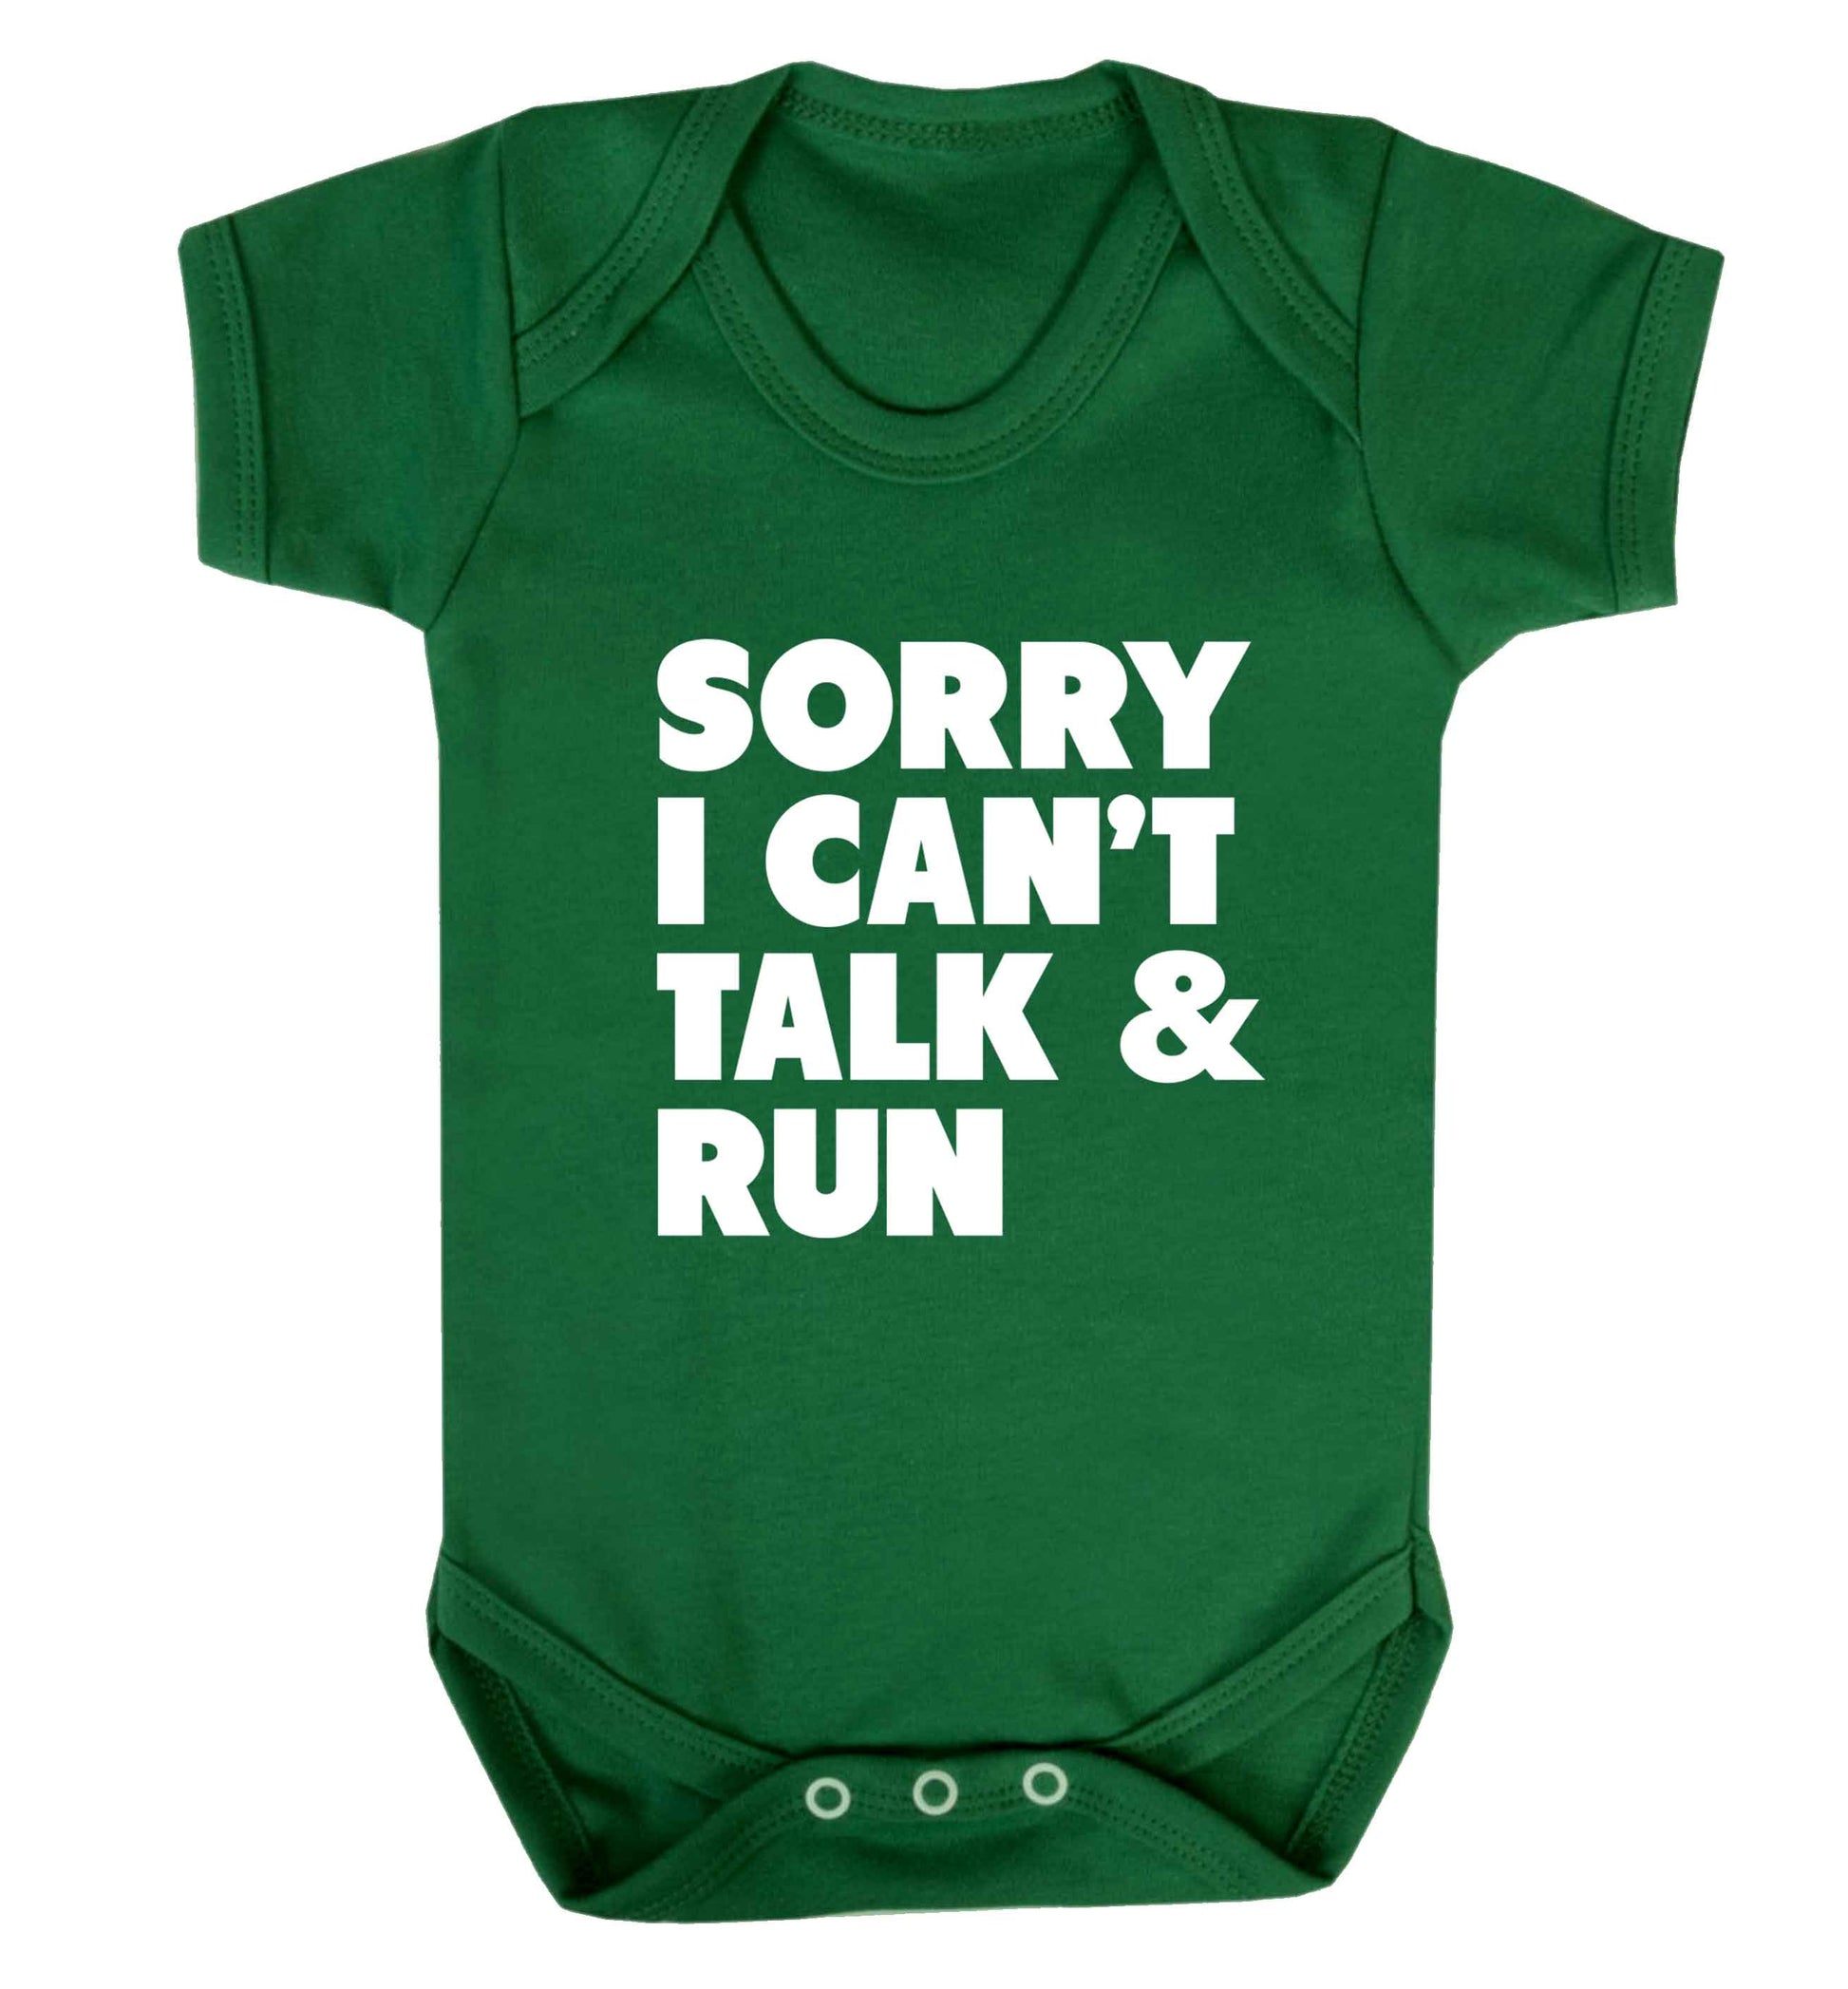 Sorry I can't talk and run baby vest green 18-24 months